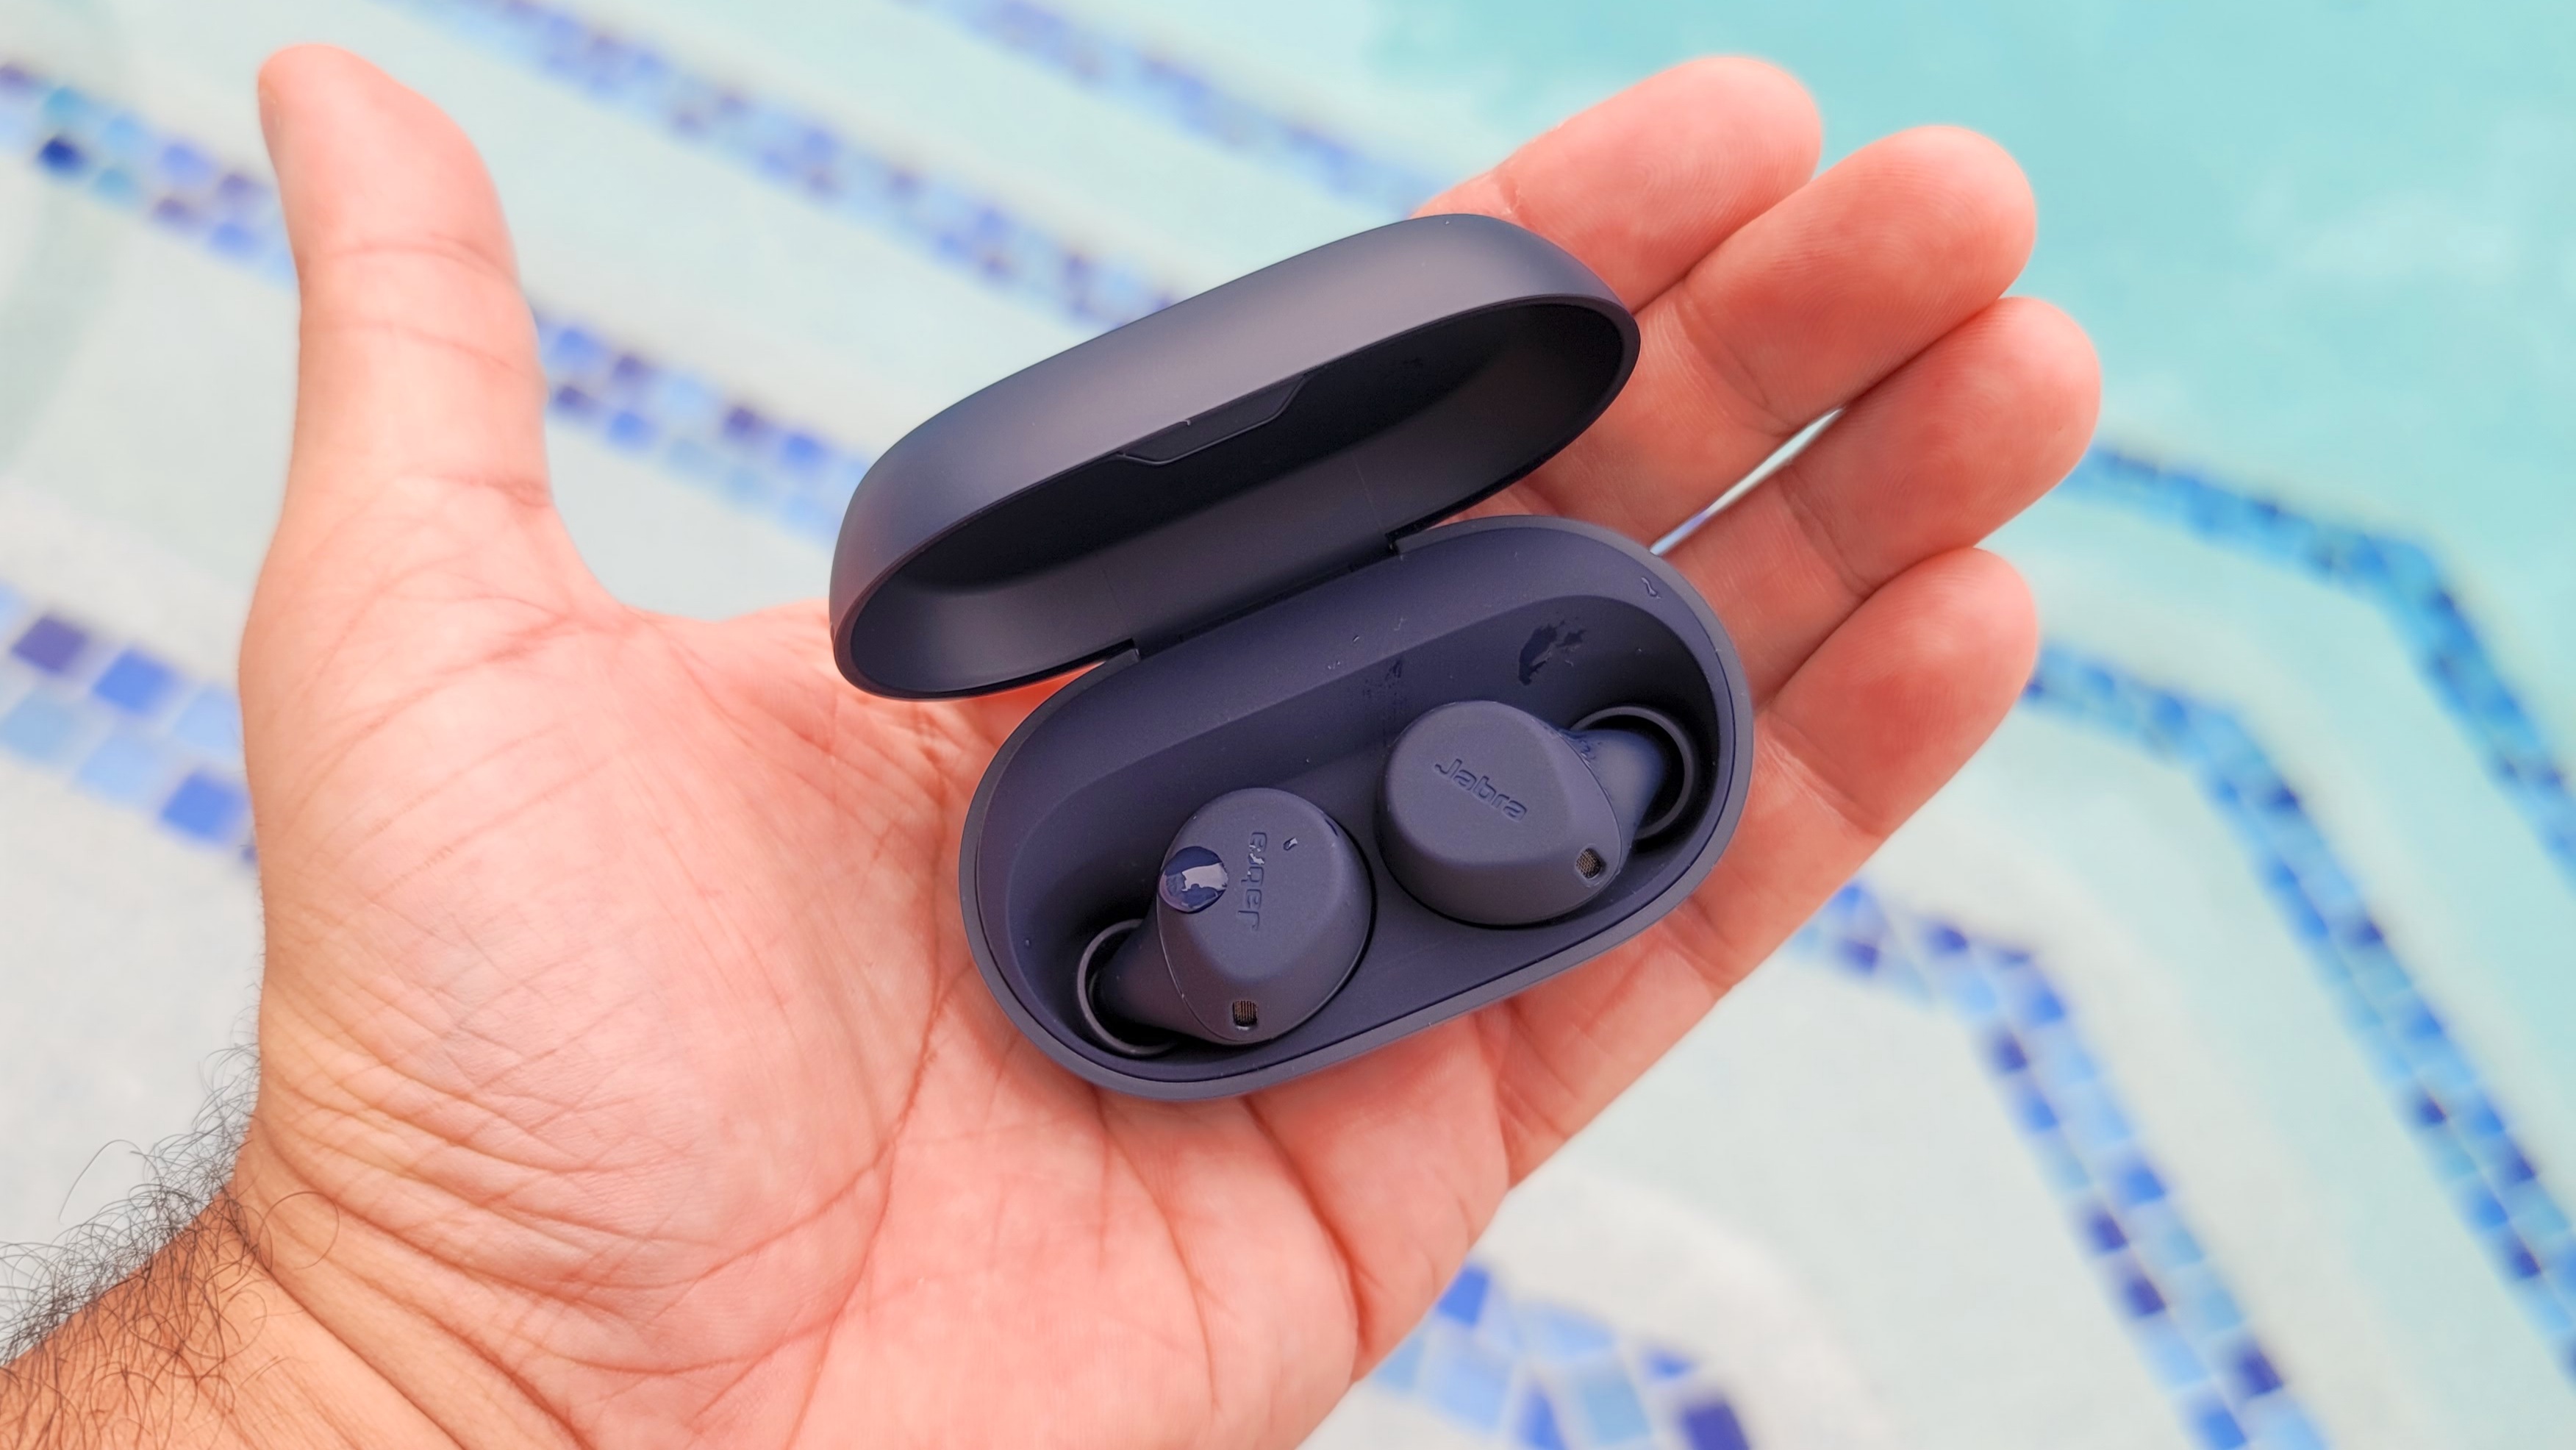 If you picked up the Jabra Elite 7 earbuds, you're gonna want this update